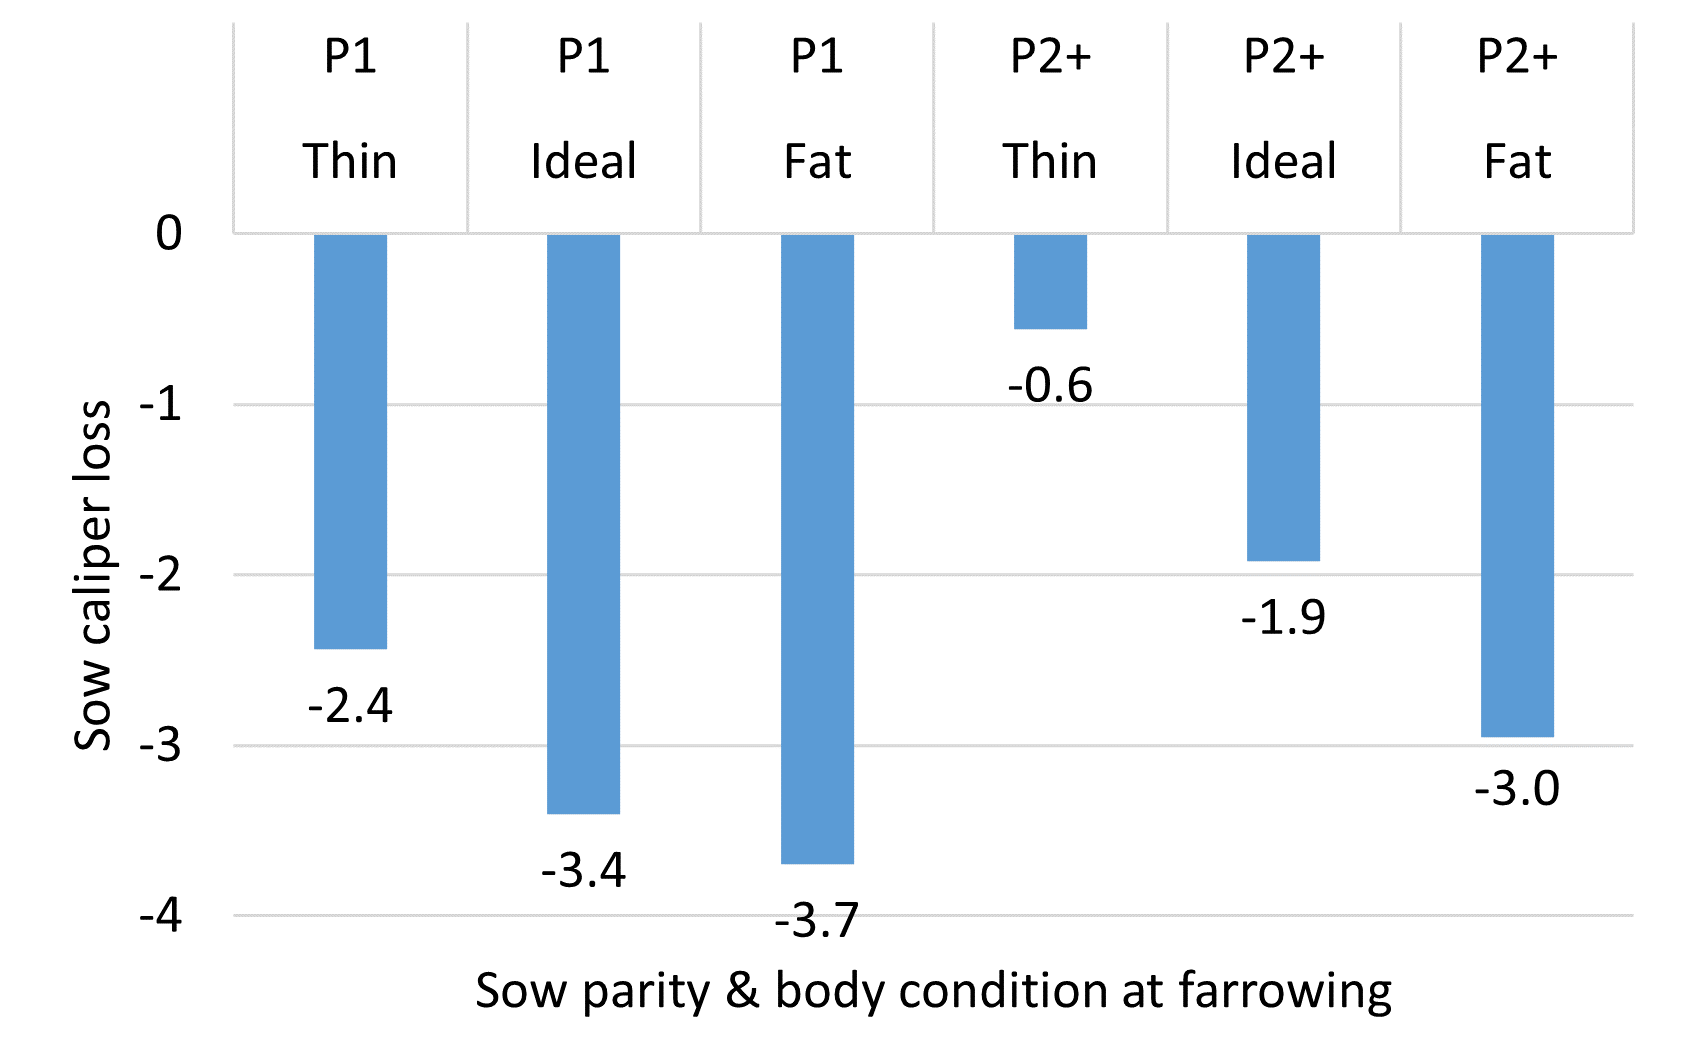 Impact of parity and prefarrow sow body condition score on lactation body condition loss during periods of heat stress